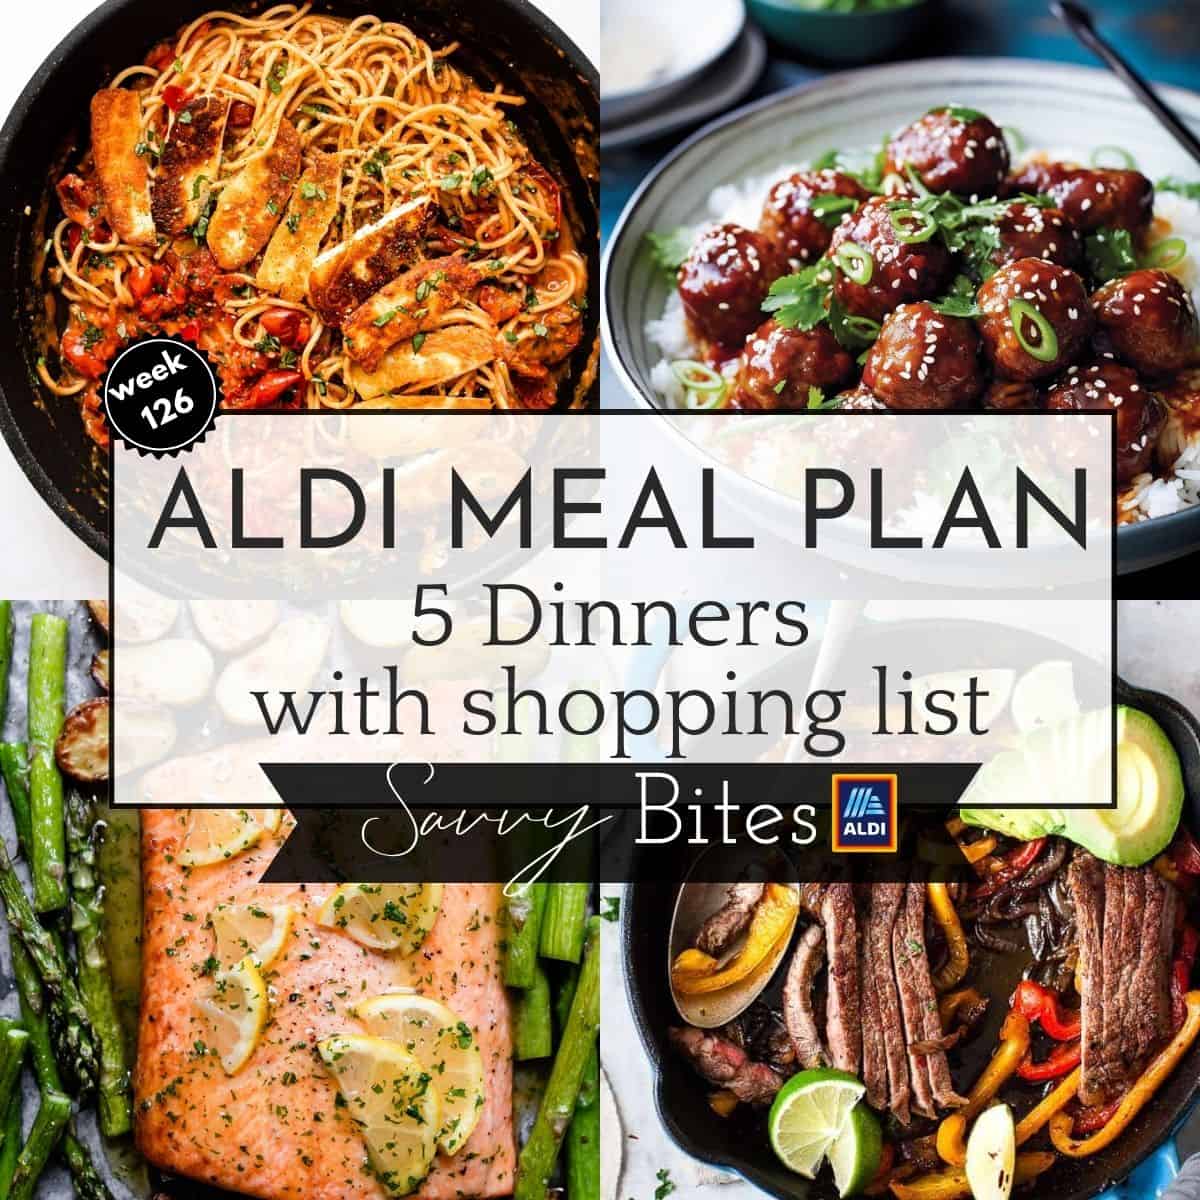 Aldi meal plan 126 photo collage.